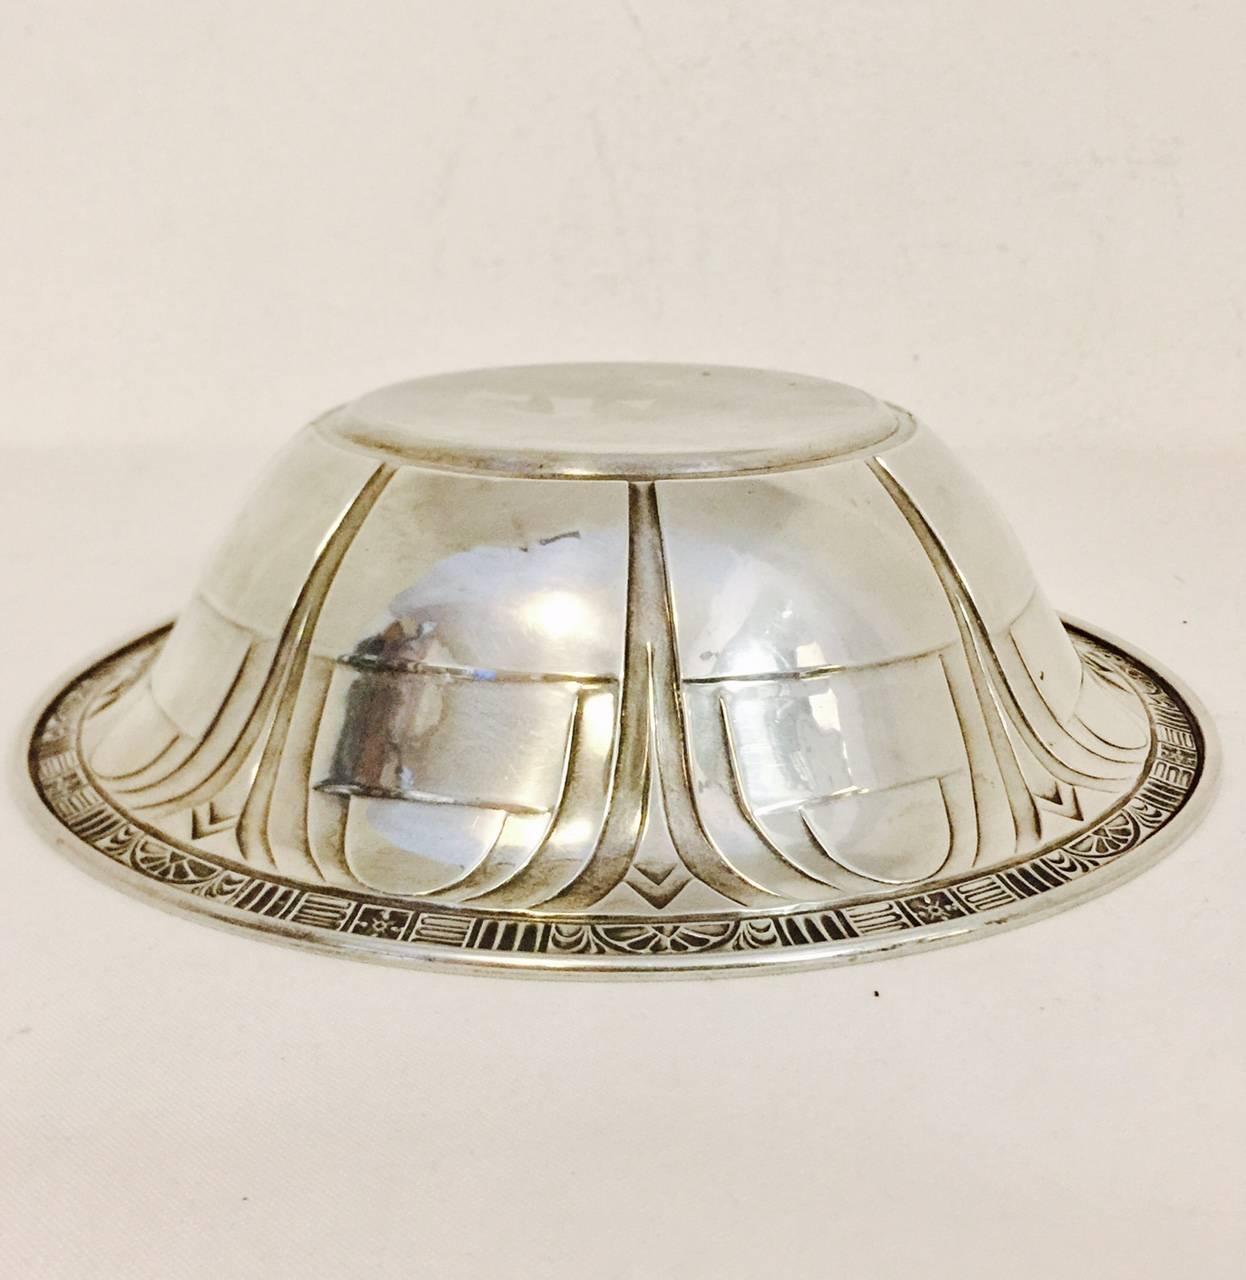 This is an extremely rare bowl . Made in limited edition in 1930, this pattern is featured in exhibition in the Dallas Museum of Art, and listed in Modernism in American Silver by Jewel Stern, page 87.  Only a luncheon plate and this bowl are found